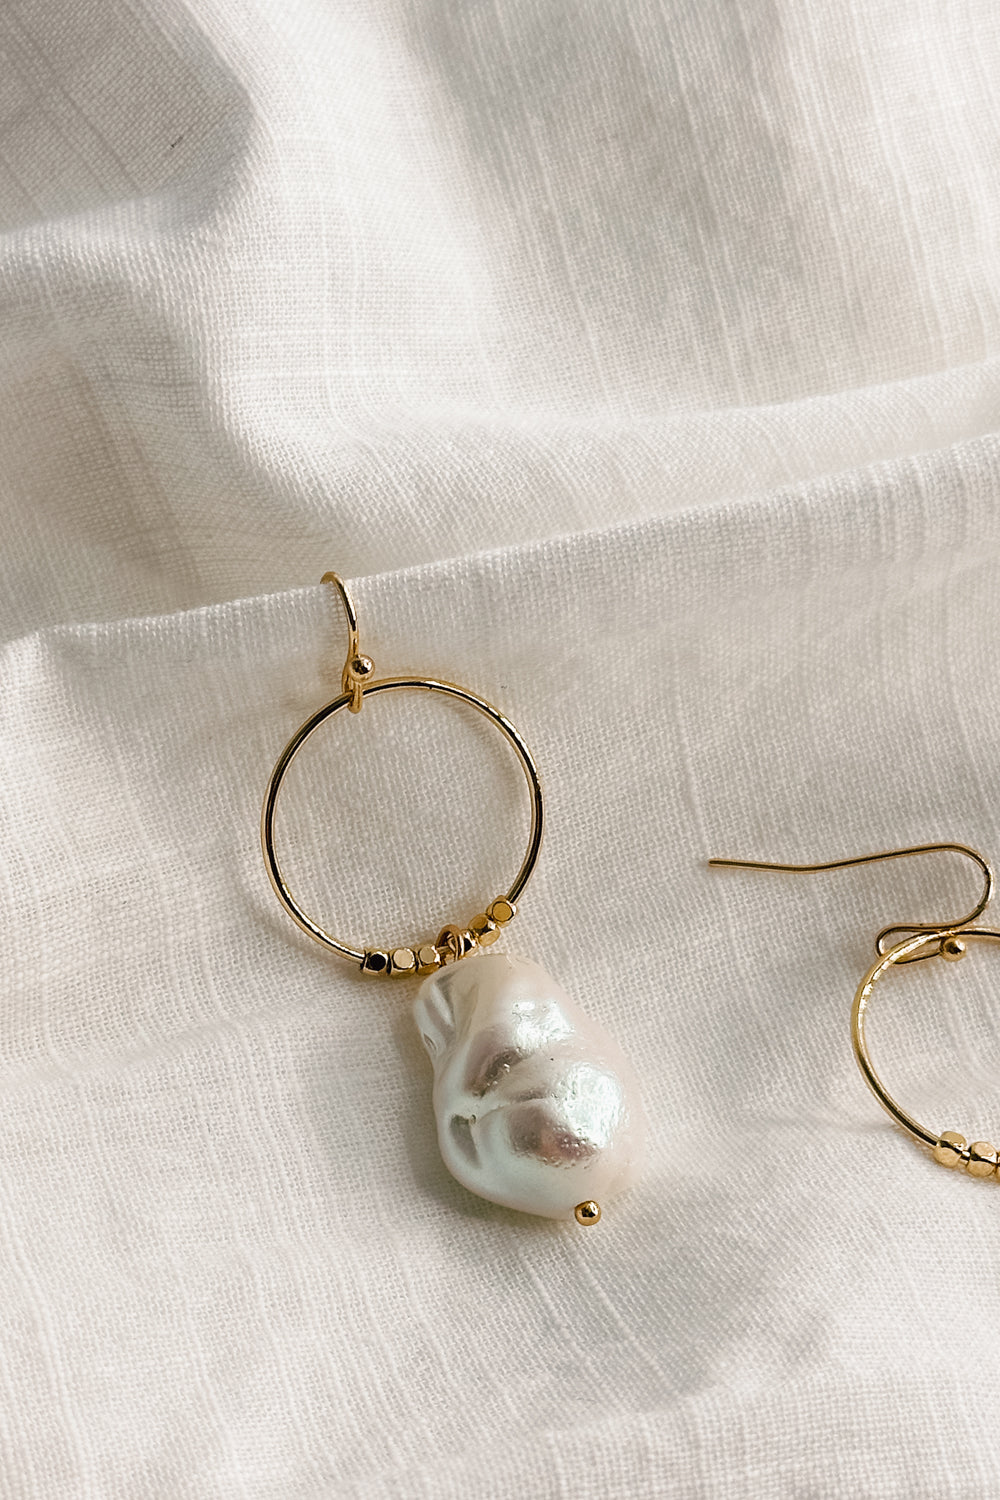 Close up view of the Shelby Pearl and Gold Mini Hoop Dangle Earring which features small gold hoop with a pearl medallion dangle attached and a hook back closure